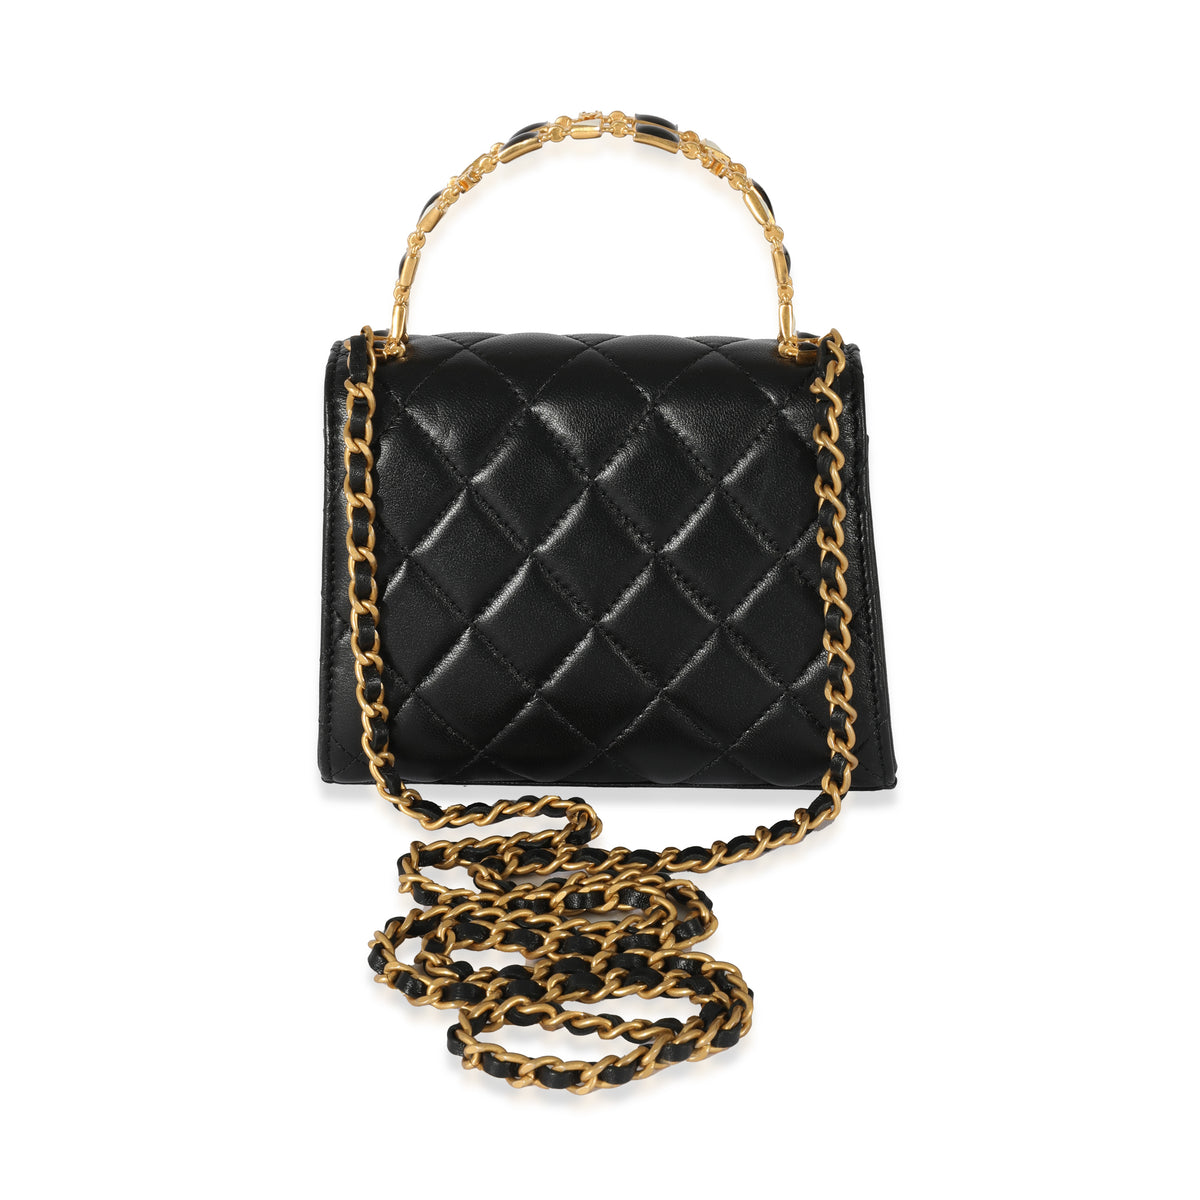 Chanel 21B Black Lambskin Small Classic Flap with Rose Gold Hardware 